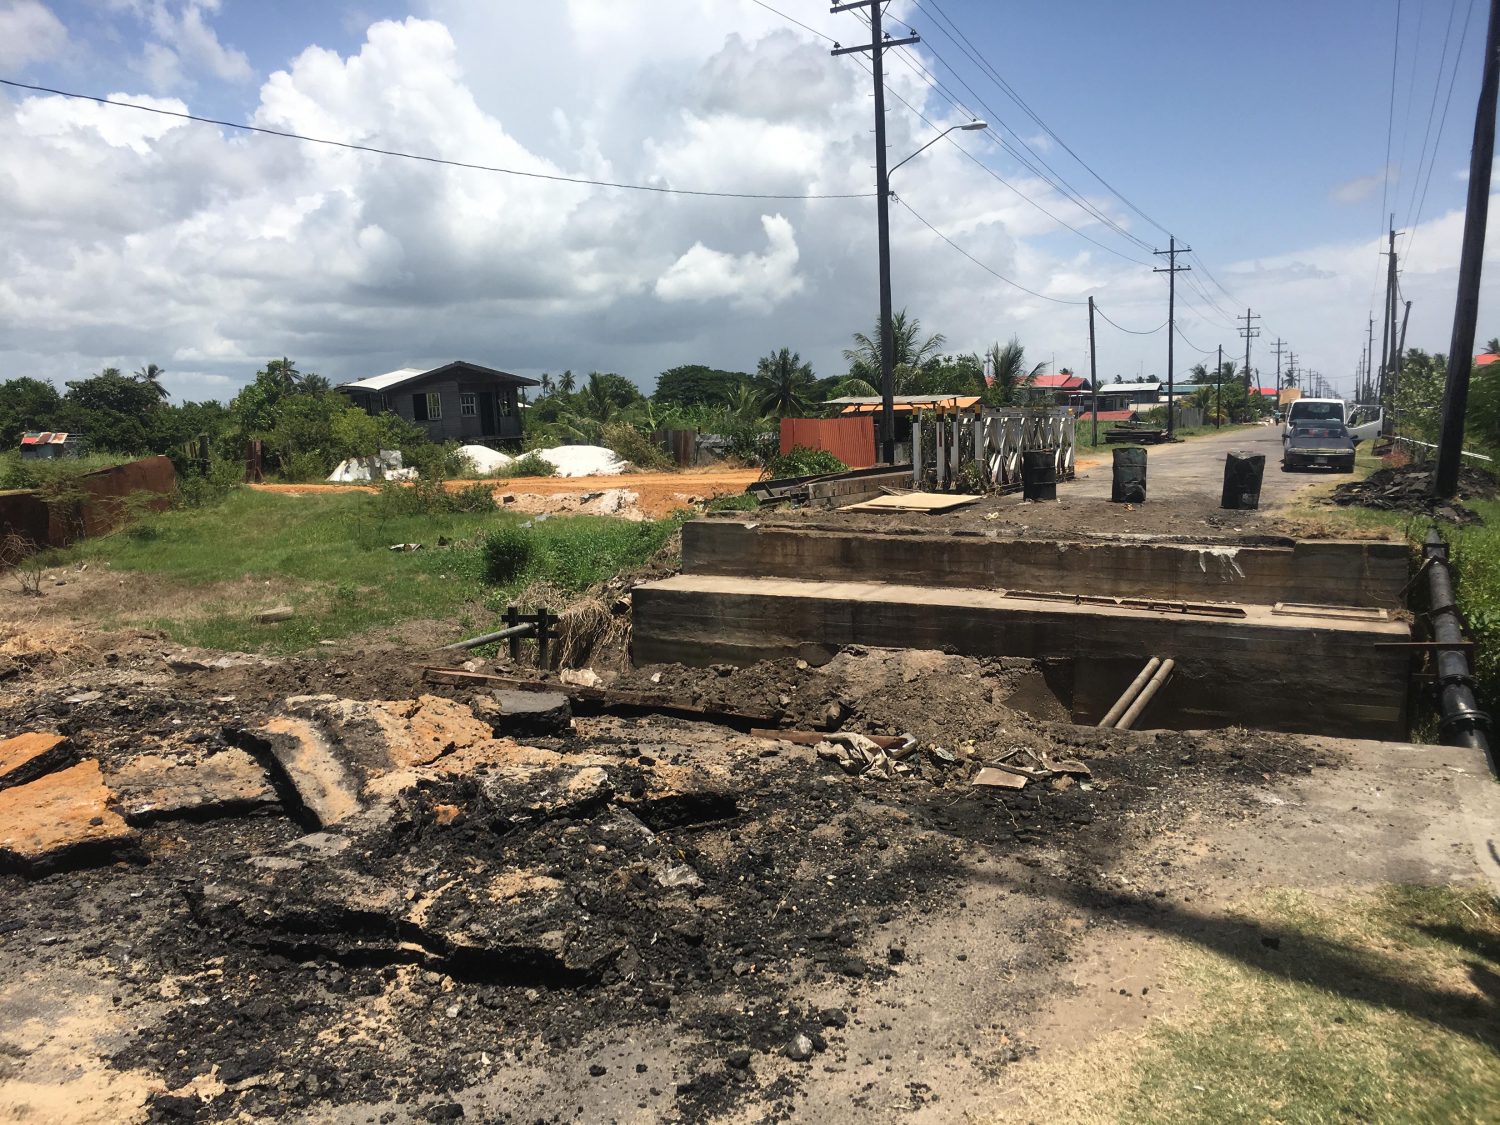 Diverted: Traffic along the Lusignan, East Coast Demerara embankment road will be diverted to the East Coast Highway for the next couple of months as the Ministry of Public Infrastructure has started major works to repair a bridge.  